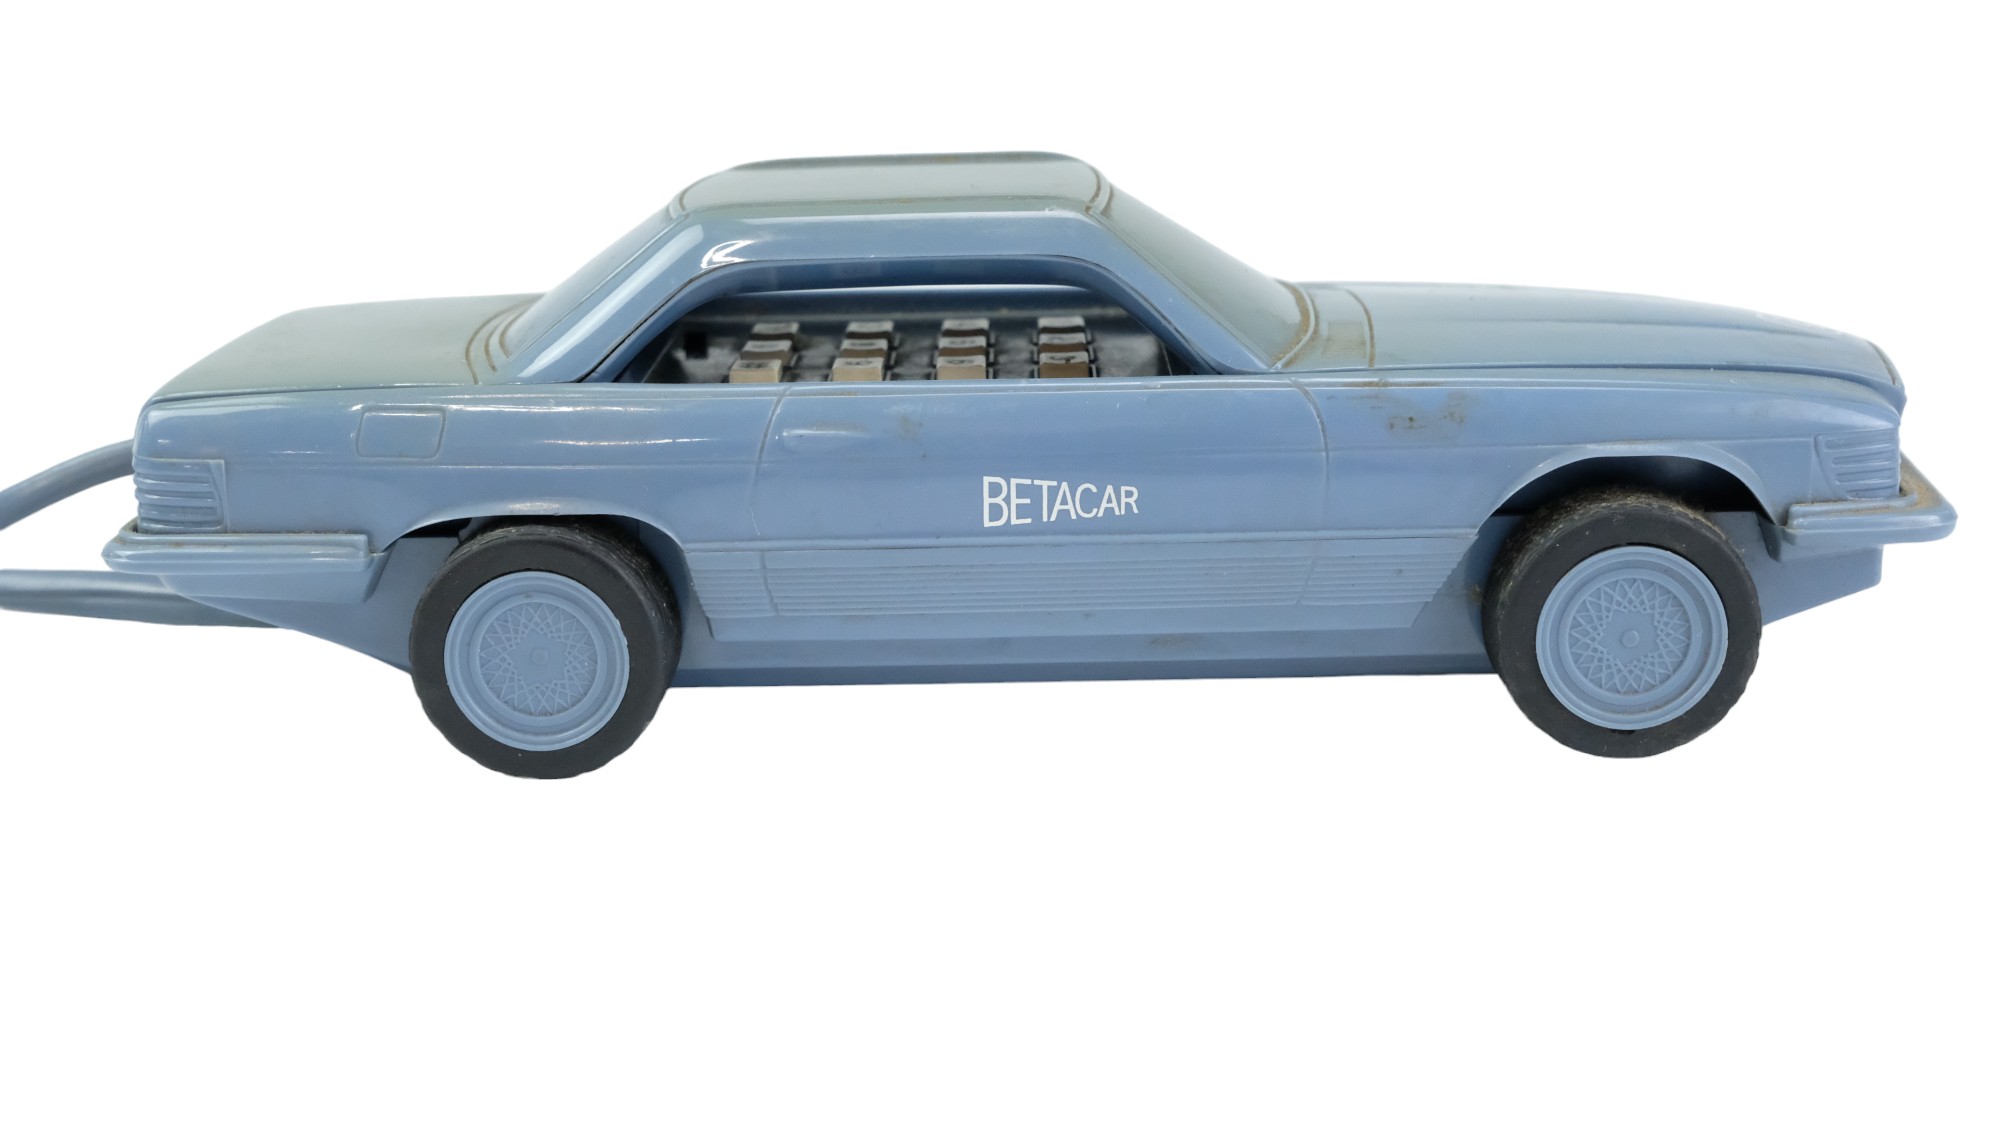 A 1980s Betacom Betacar novelty telephone modelled as a car, 22 x 9.5 x 7 cm - Image 3 of 5